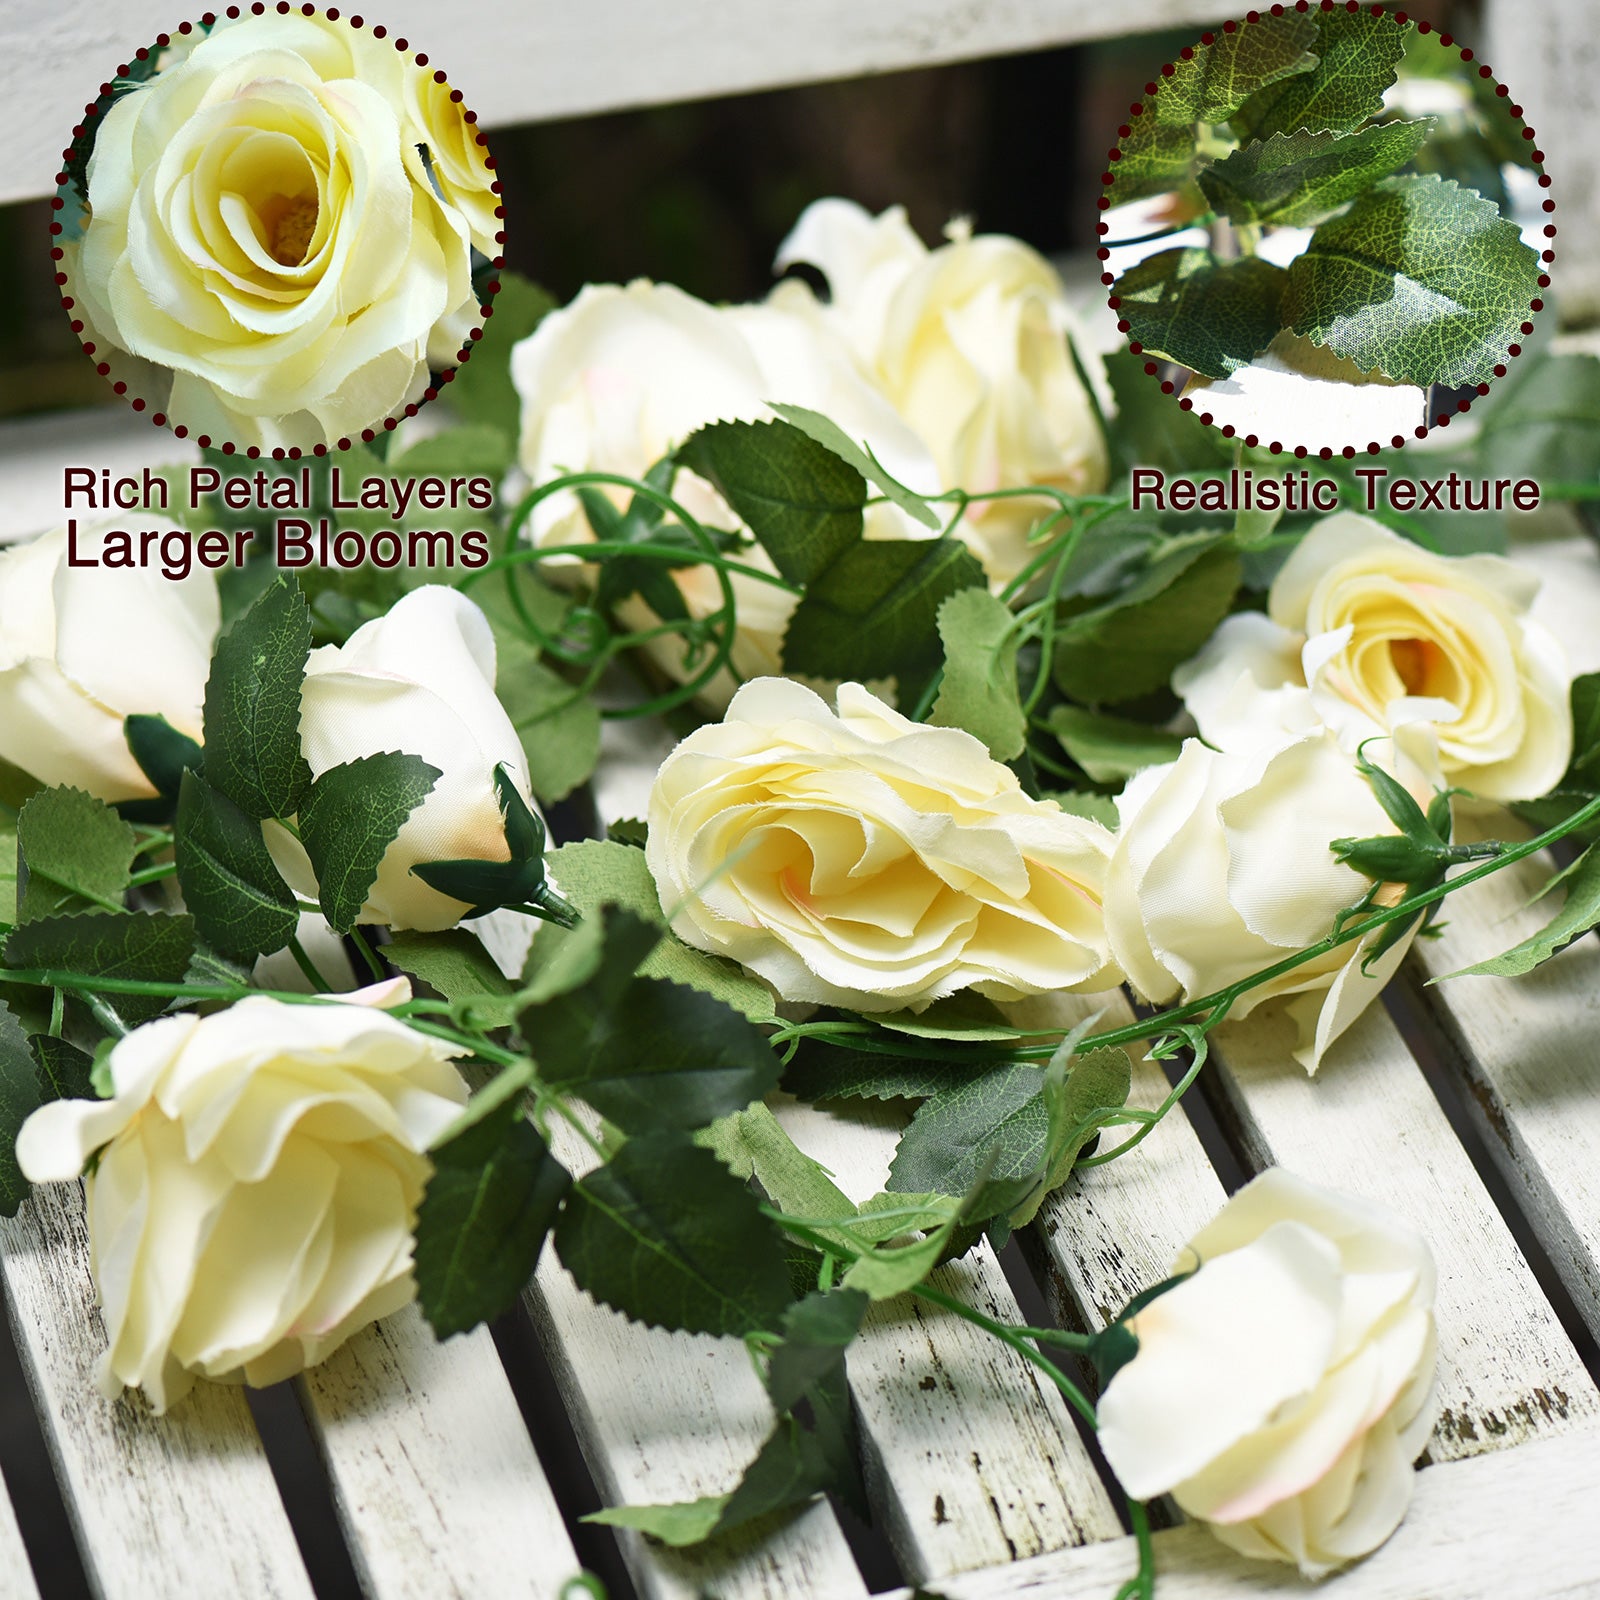 2 Bunches 14.4 ft of Cream White Artificial Silk Rose Vines Hanging Foliage Leaves